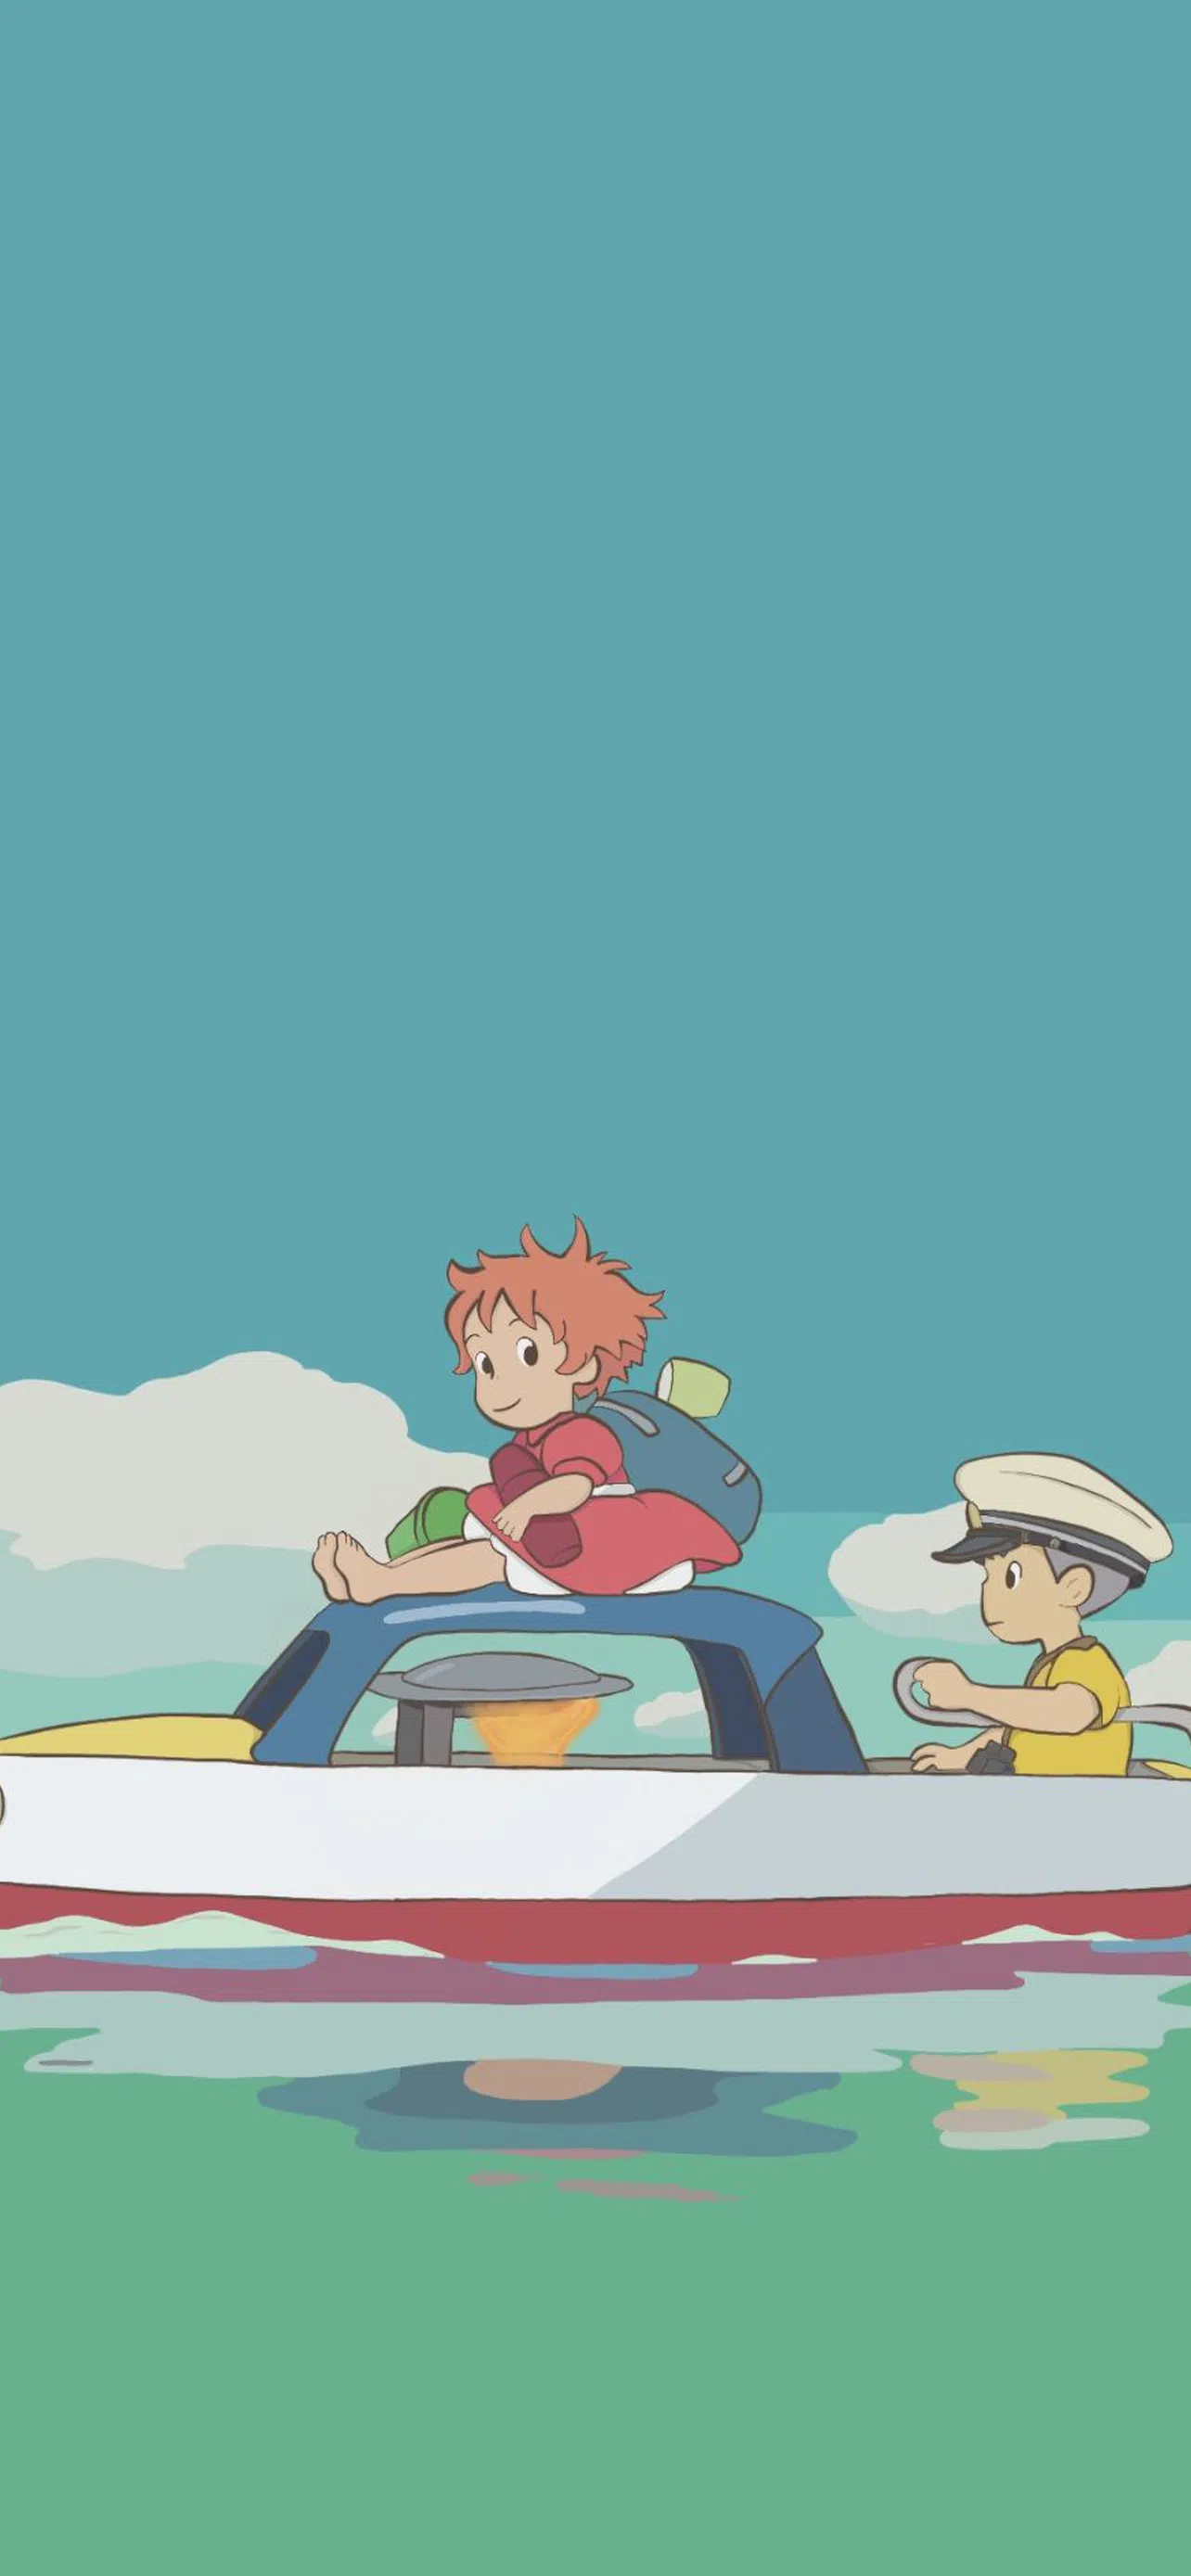 Mobile wallpaper Anime Ponyo 1197565 download the picture for free